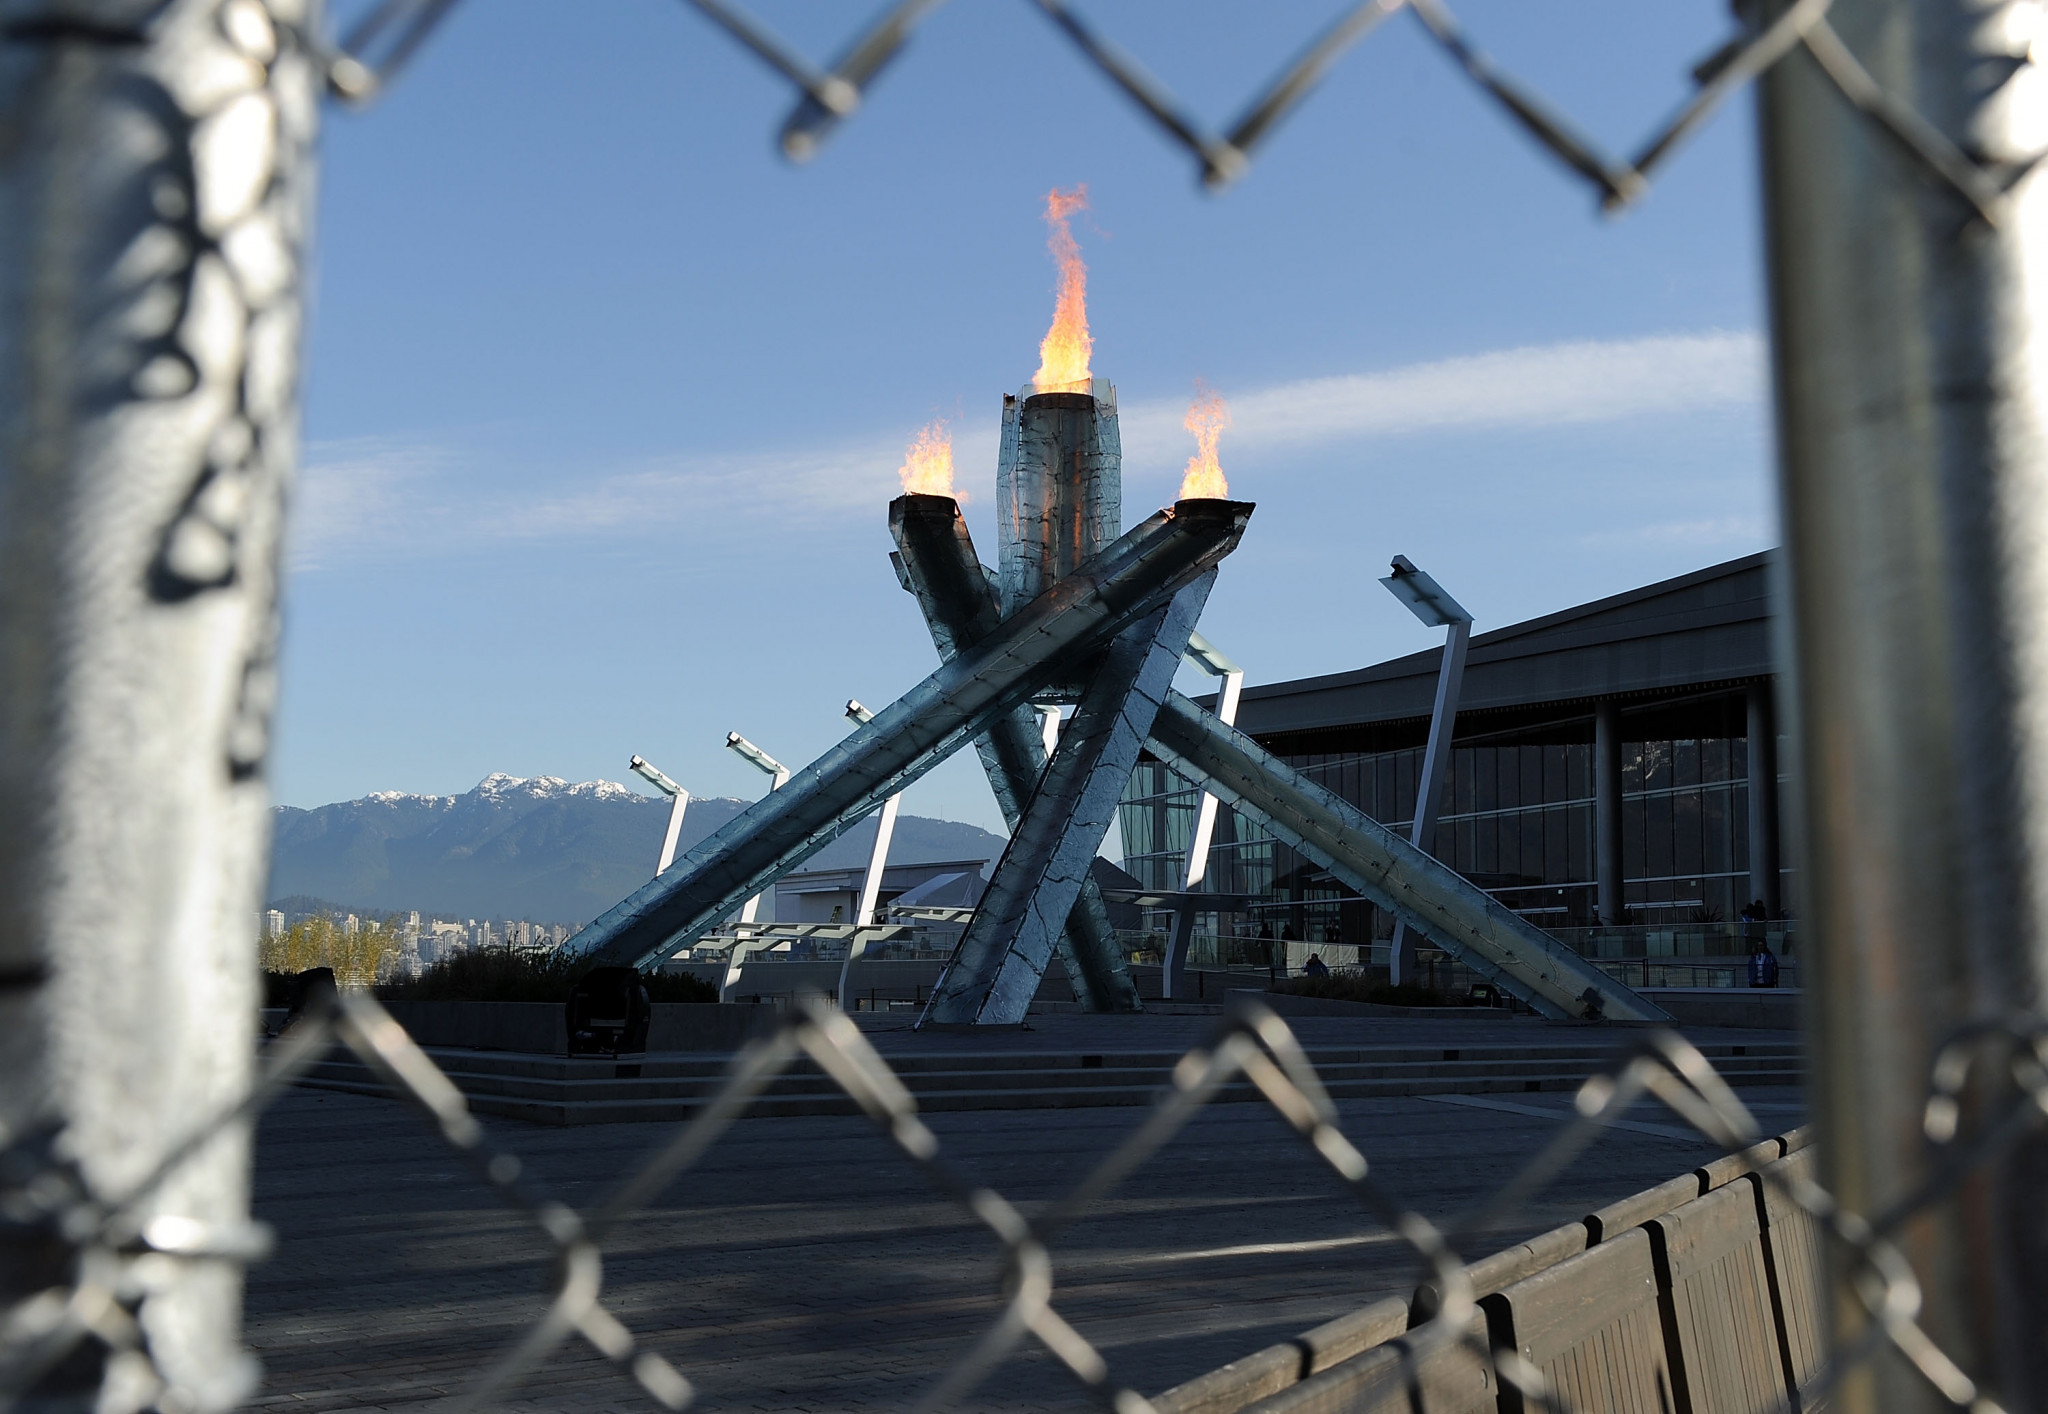 During the 2010 Games, many were upset that the cauldron was surrounded by a chain link fence ©Getty Images